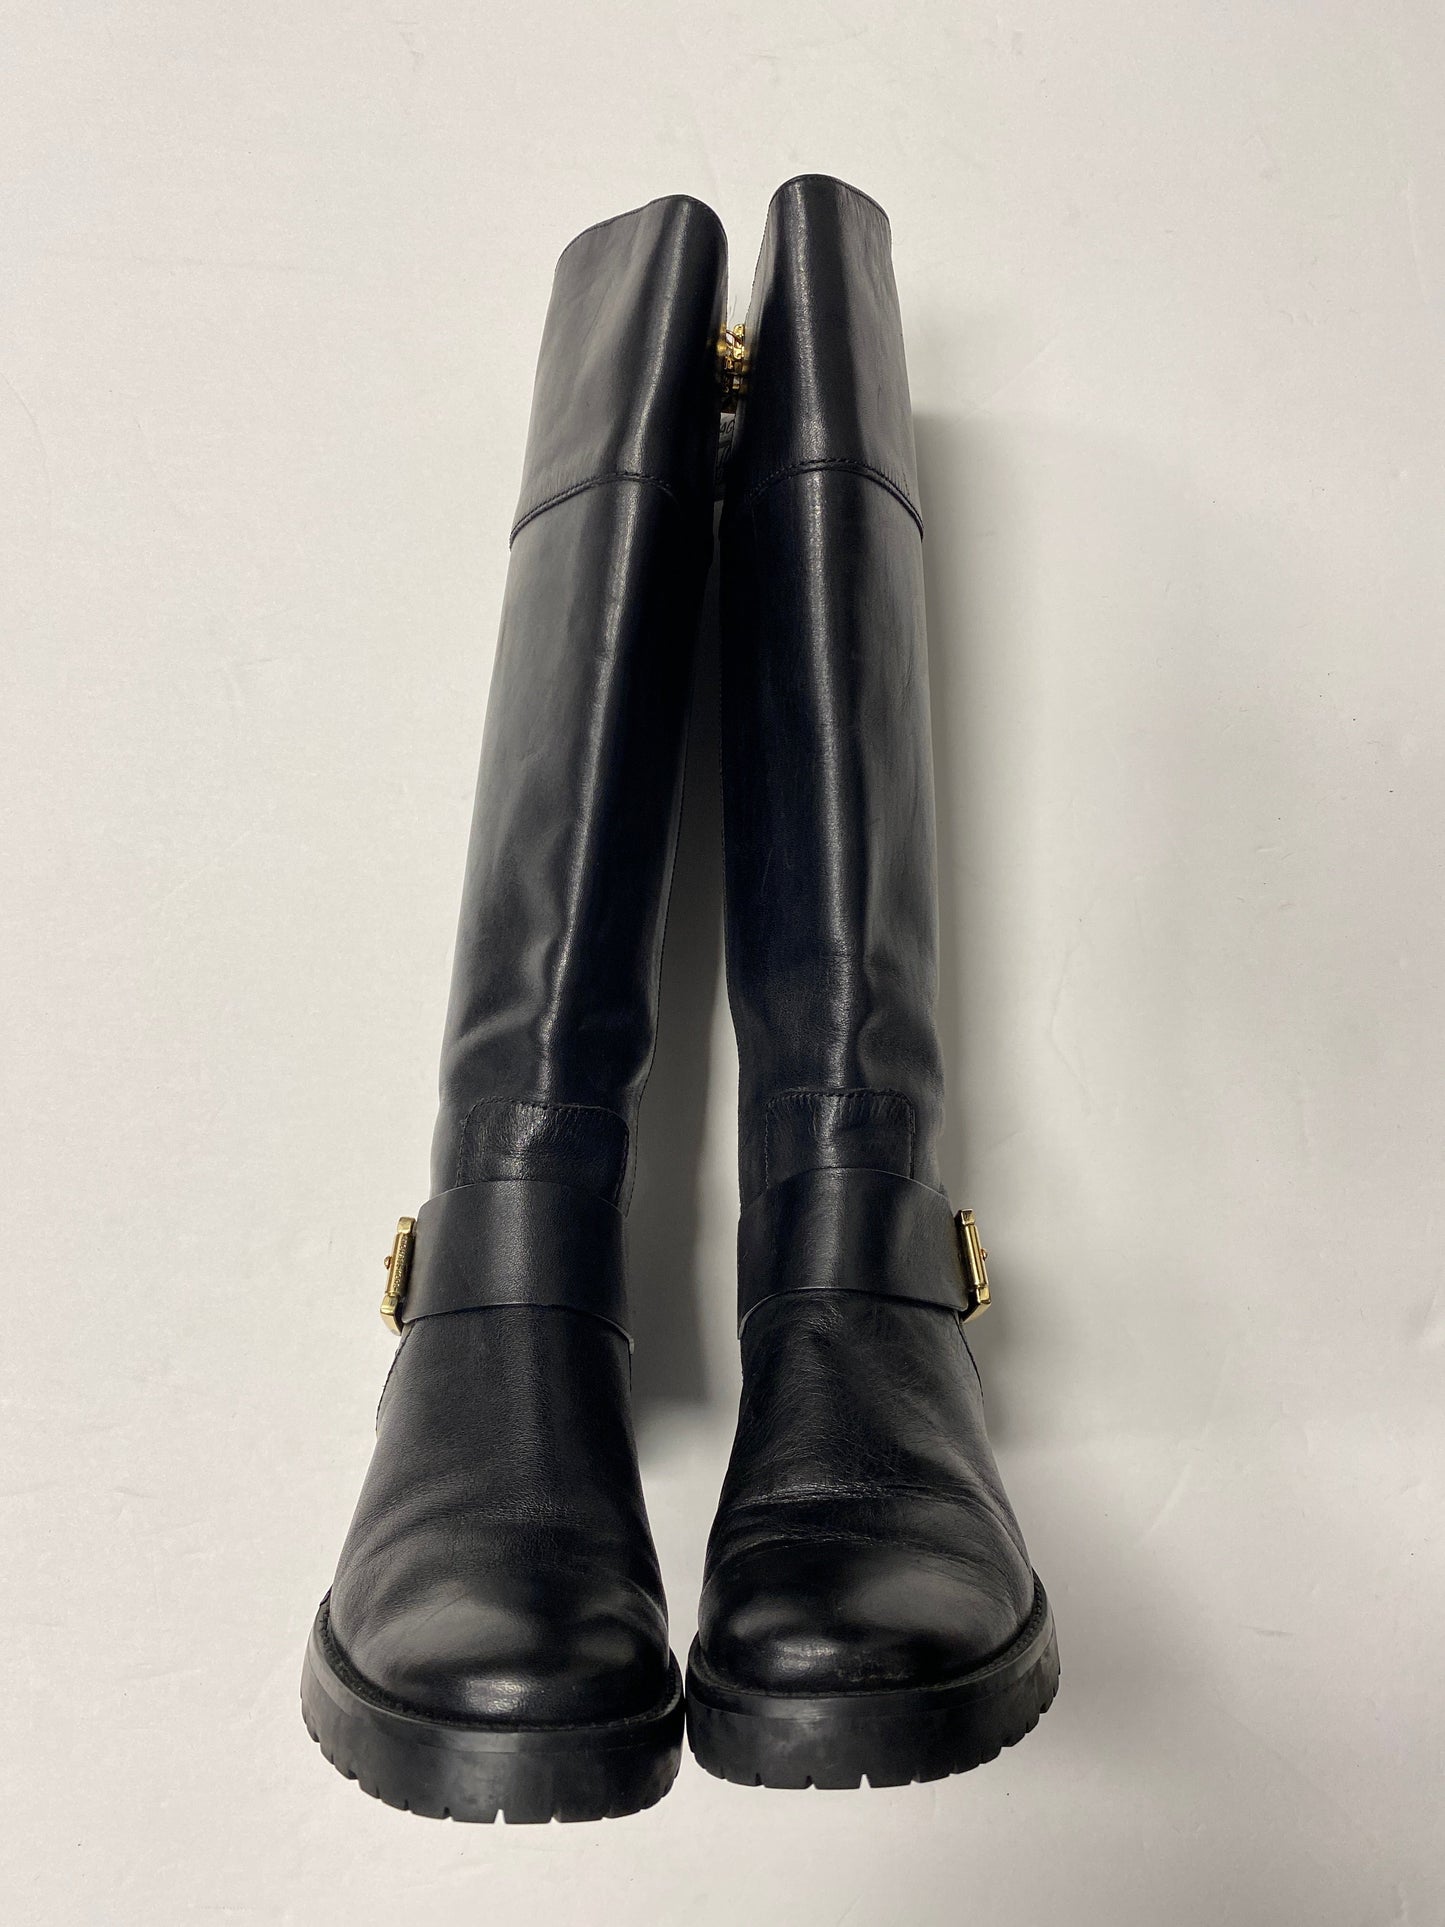 Boots Knee Flats By Michael Kors  Size: 5.5